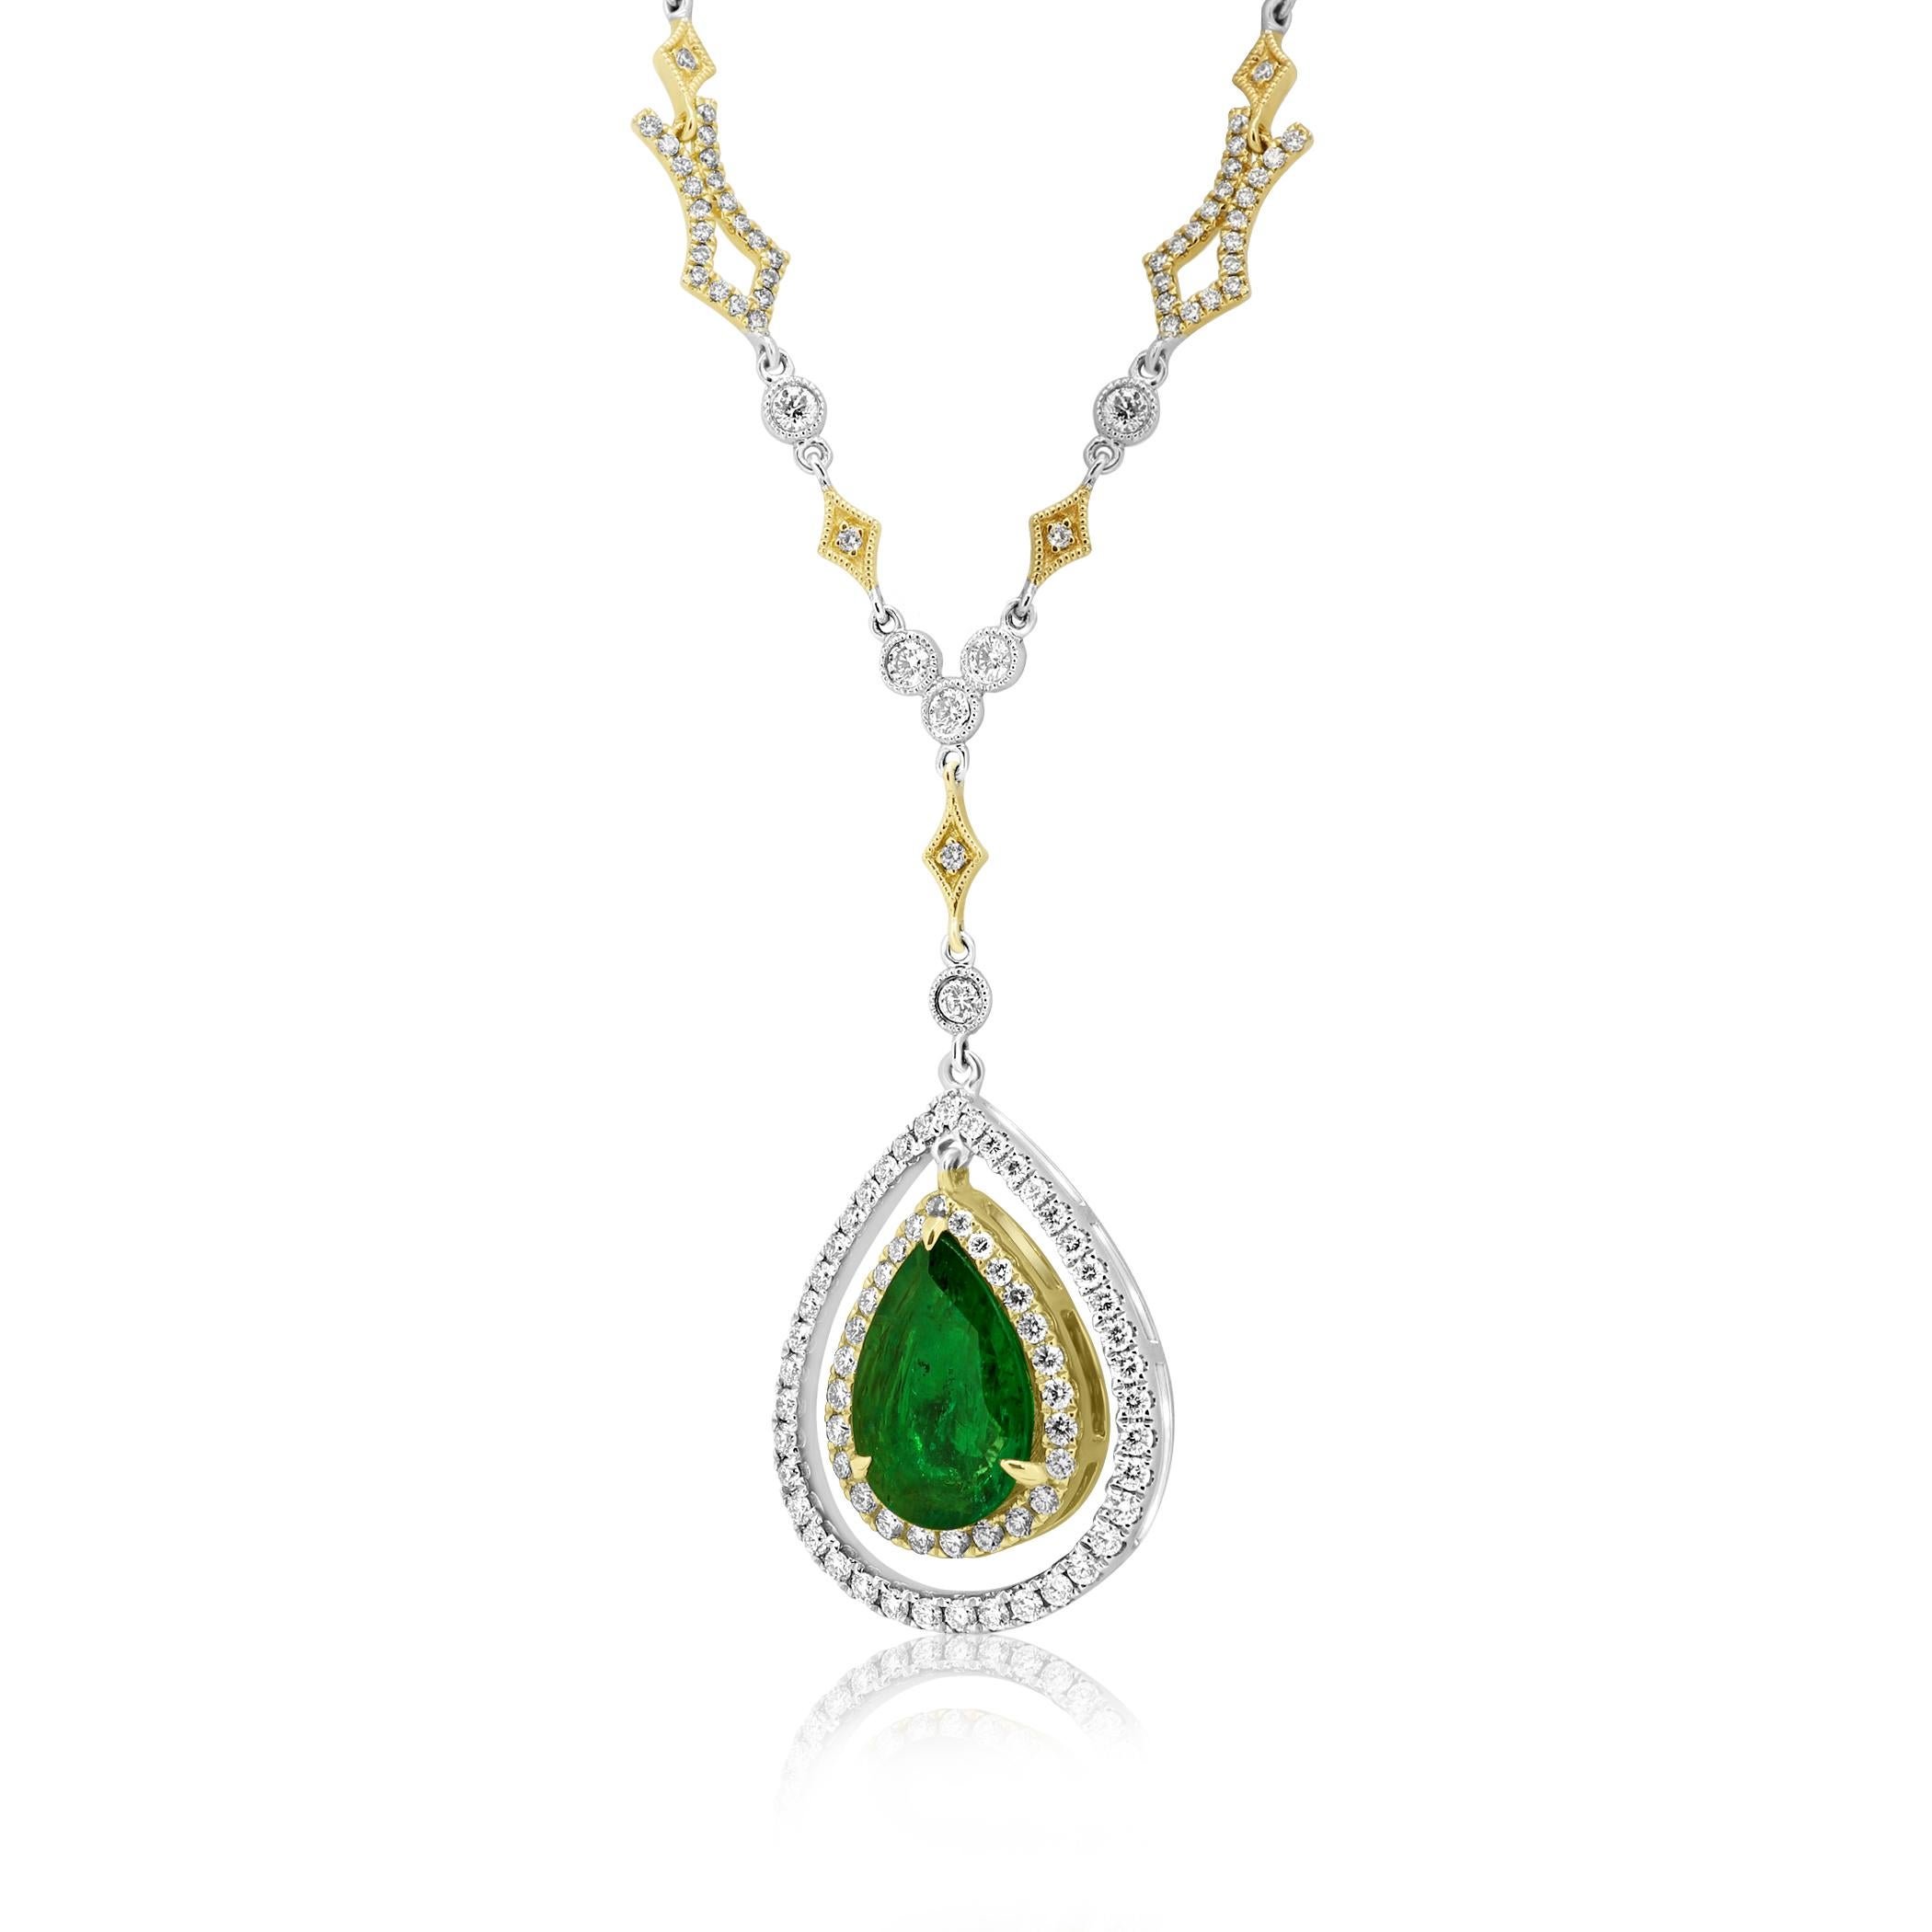 Stunning Emerald Pear Shape 2.60 Carat Encircled in a Double Halo of White G-H Color VS-SI Diamond 1.75 Carat in 14K White and Yellow Gold Drop Pendant Necklace with Diamond by Yard Chain. Total Weight 4.35 Carat

Style available in different price